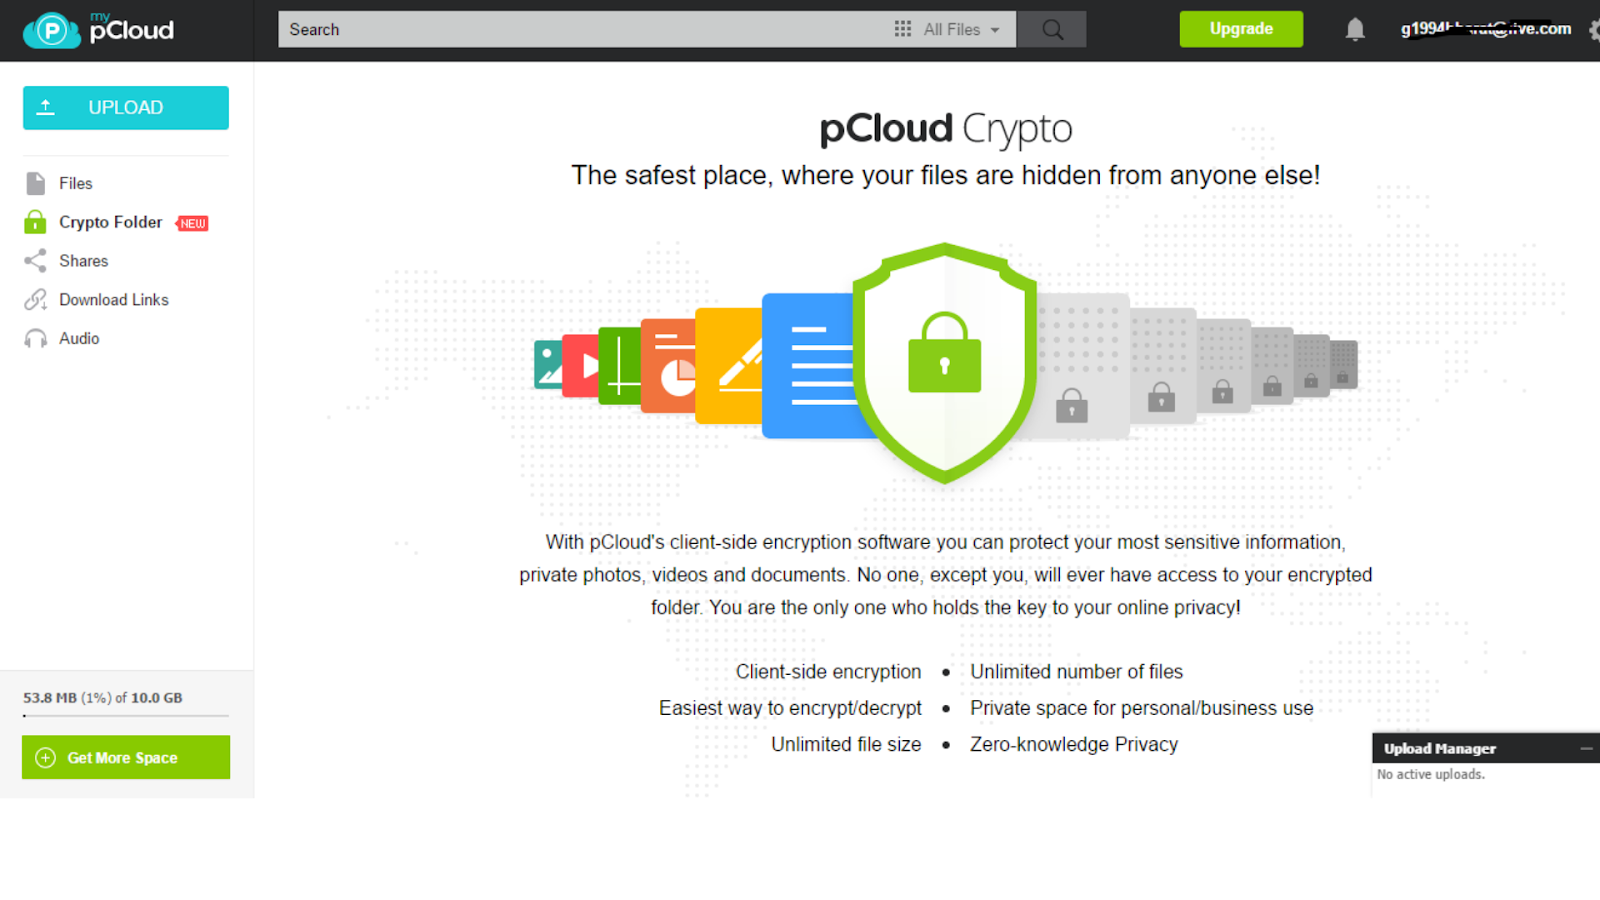 pCloud Crypto in use